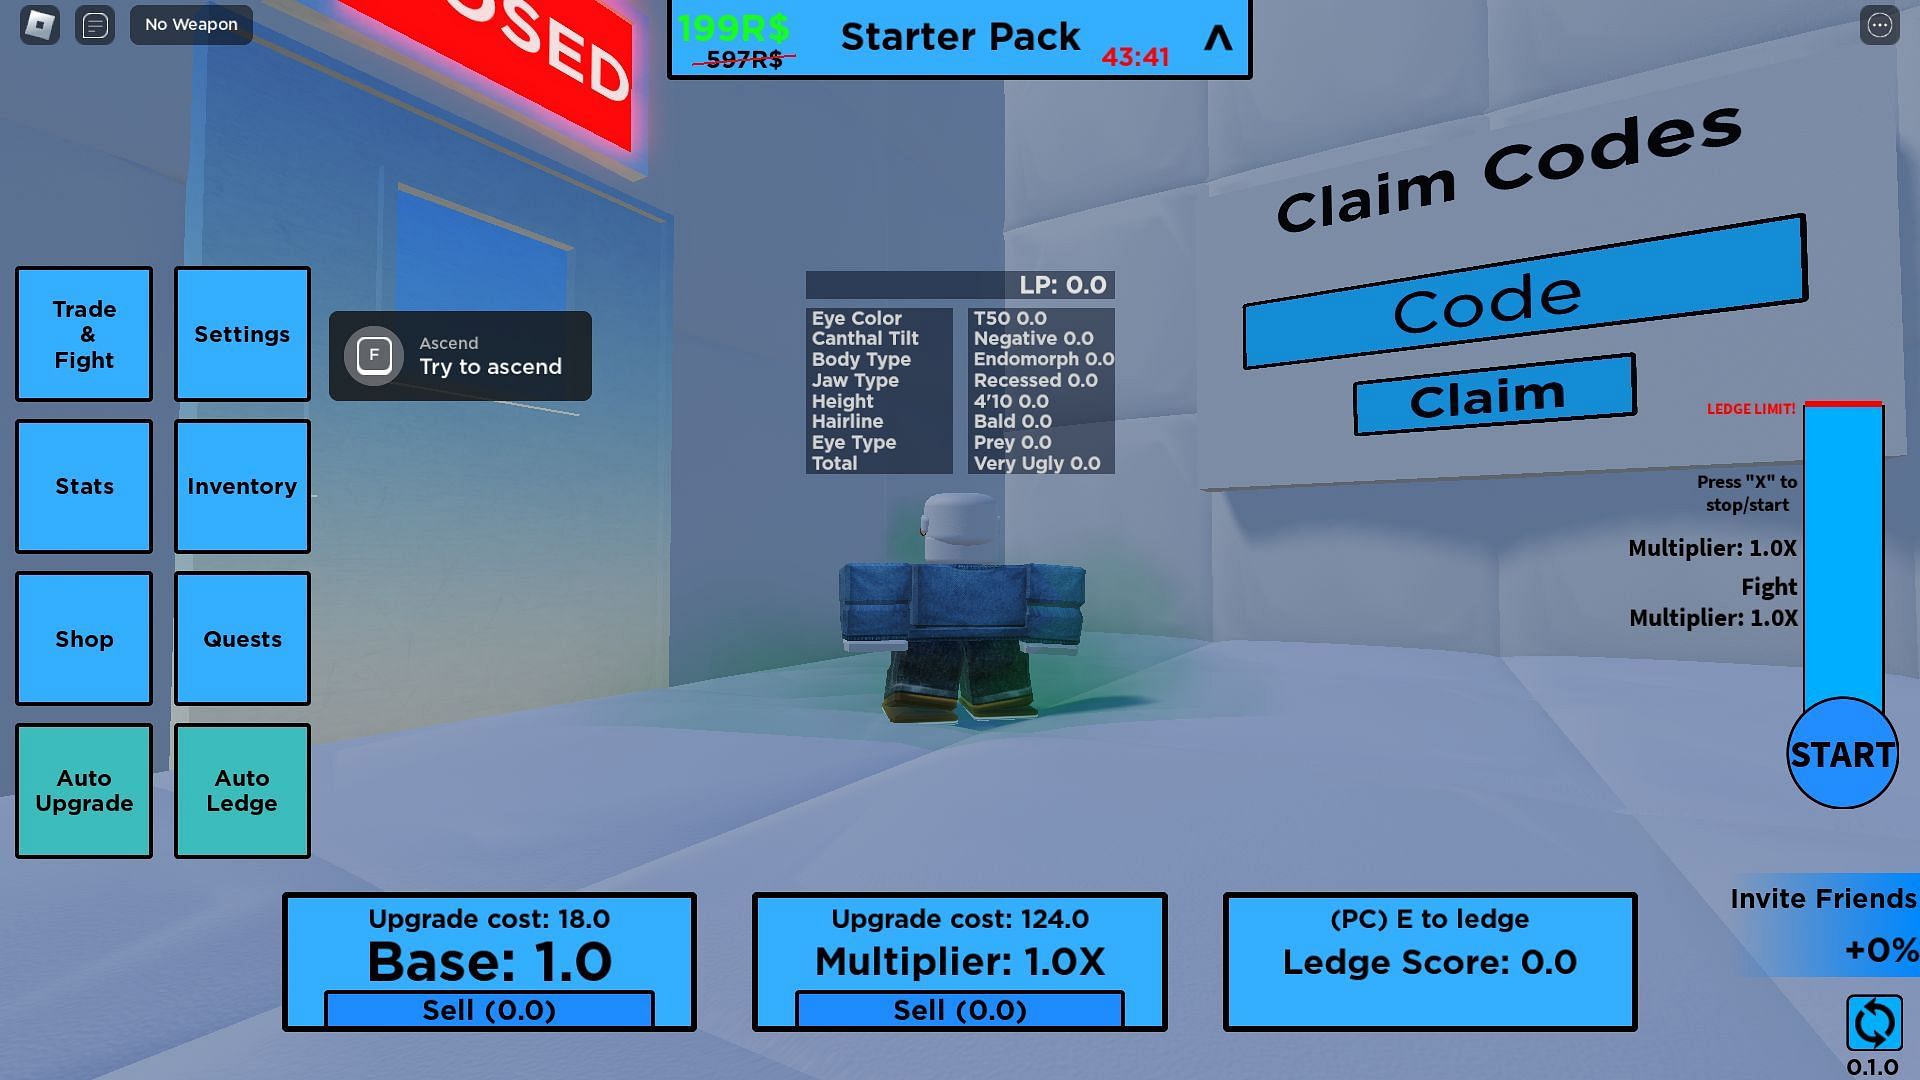 How to redeem codes for Edge Mogger (Image via Roblox)